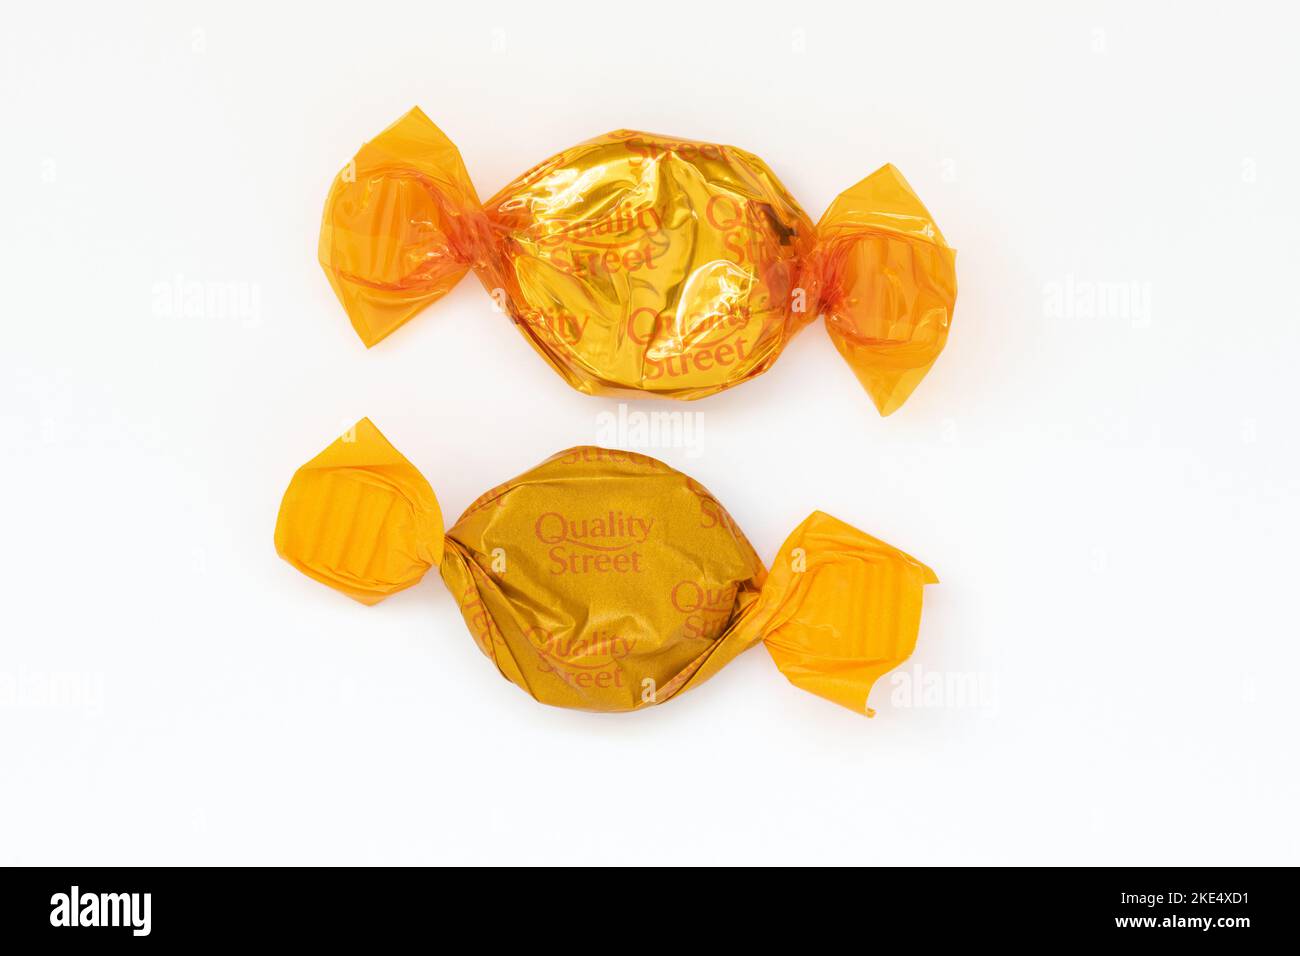 new Quality Street recyclable wax-based paper wrapper Stock Photo